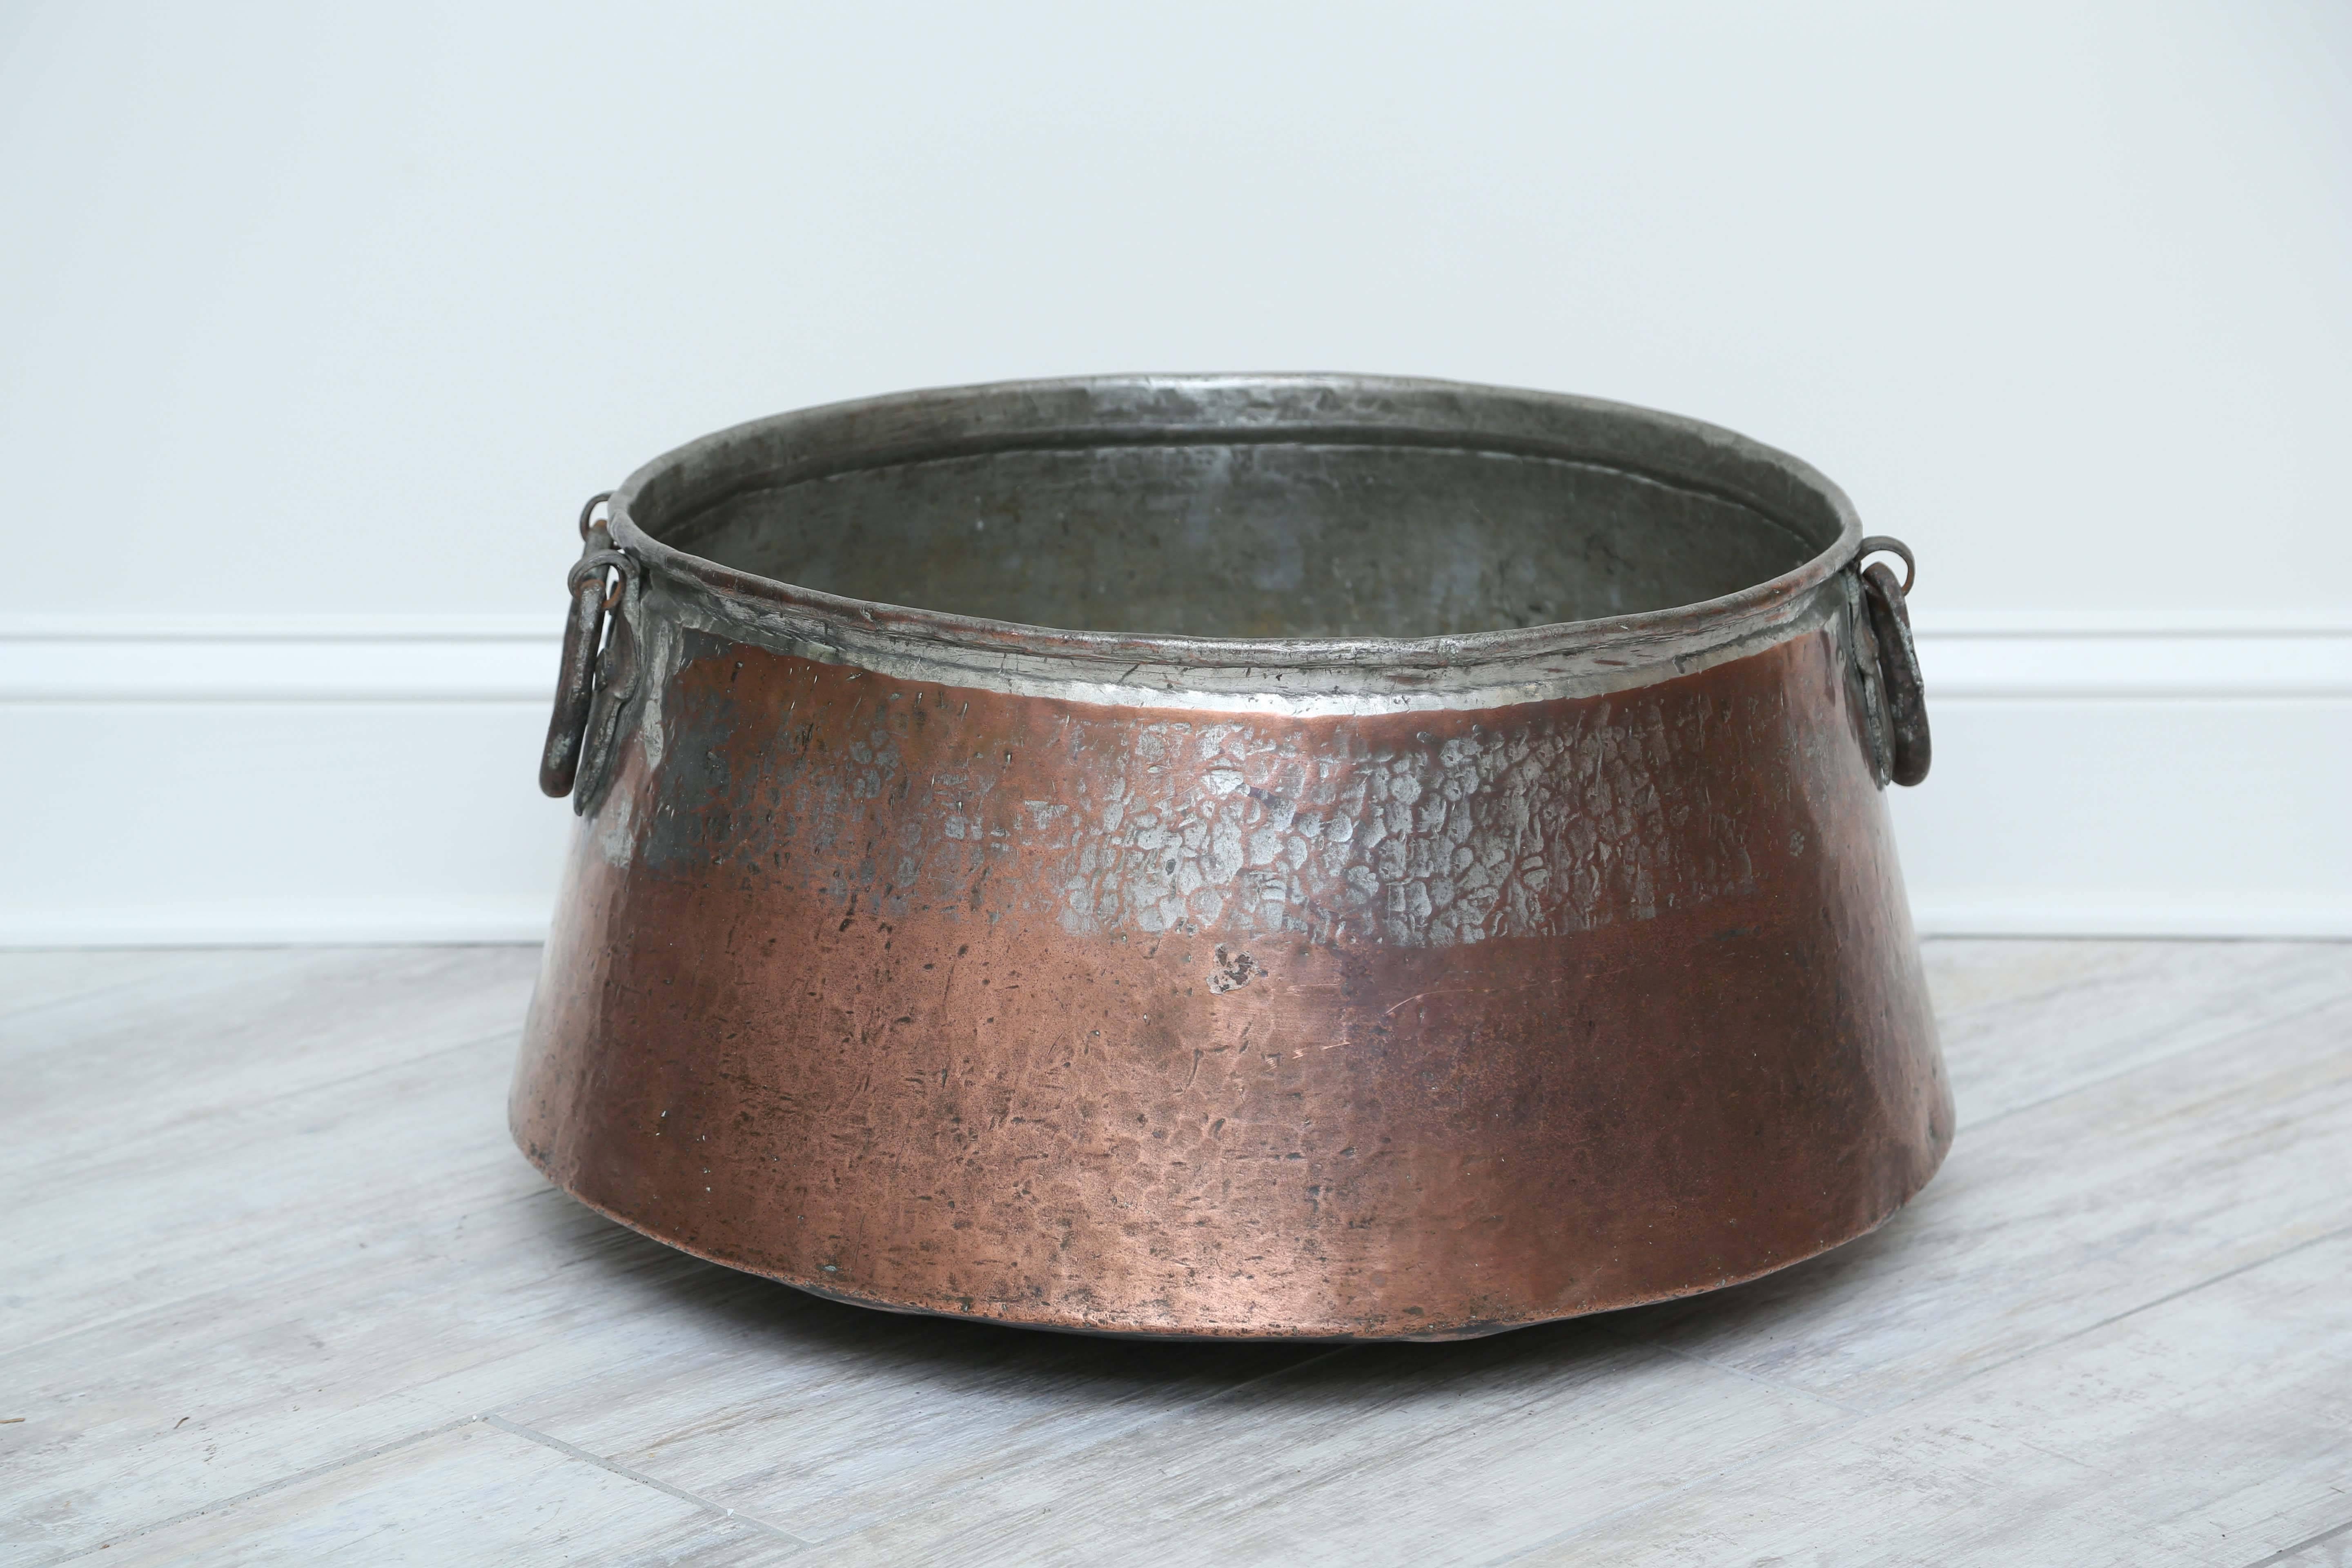 Fabulous large antique copper pot with hand-forged handles.